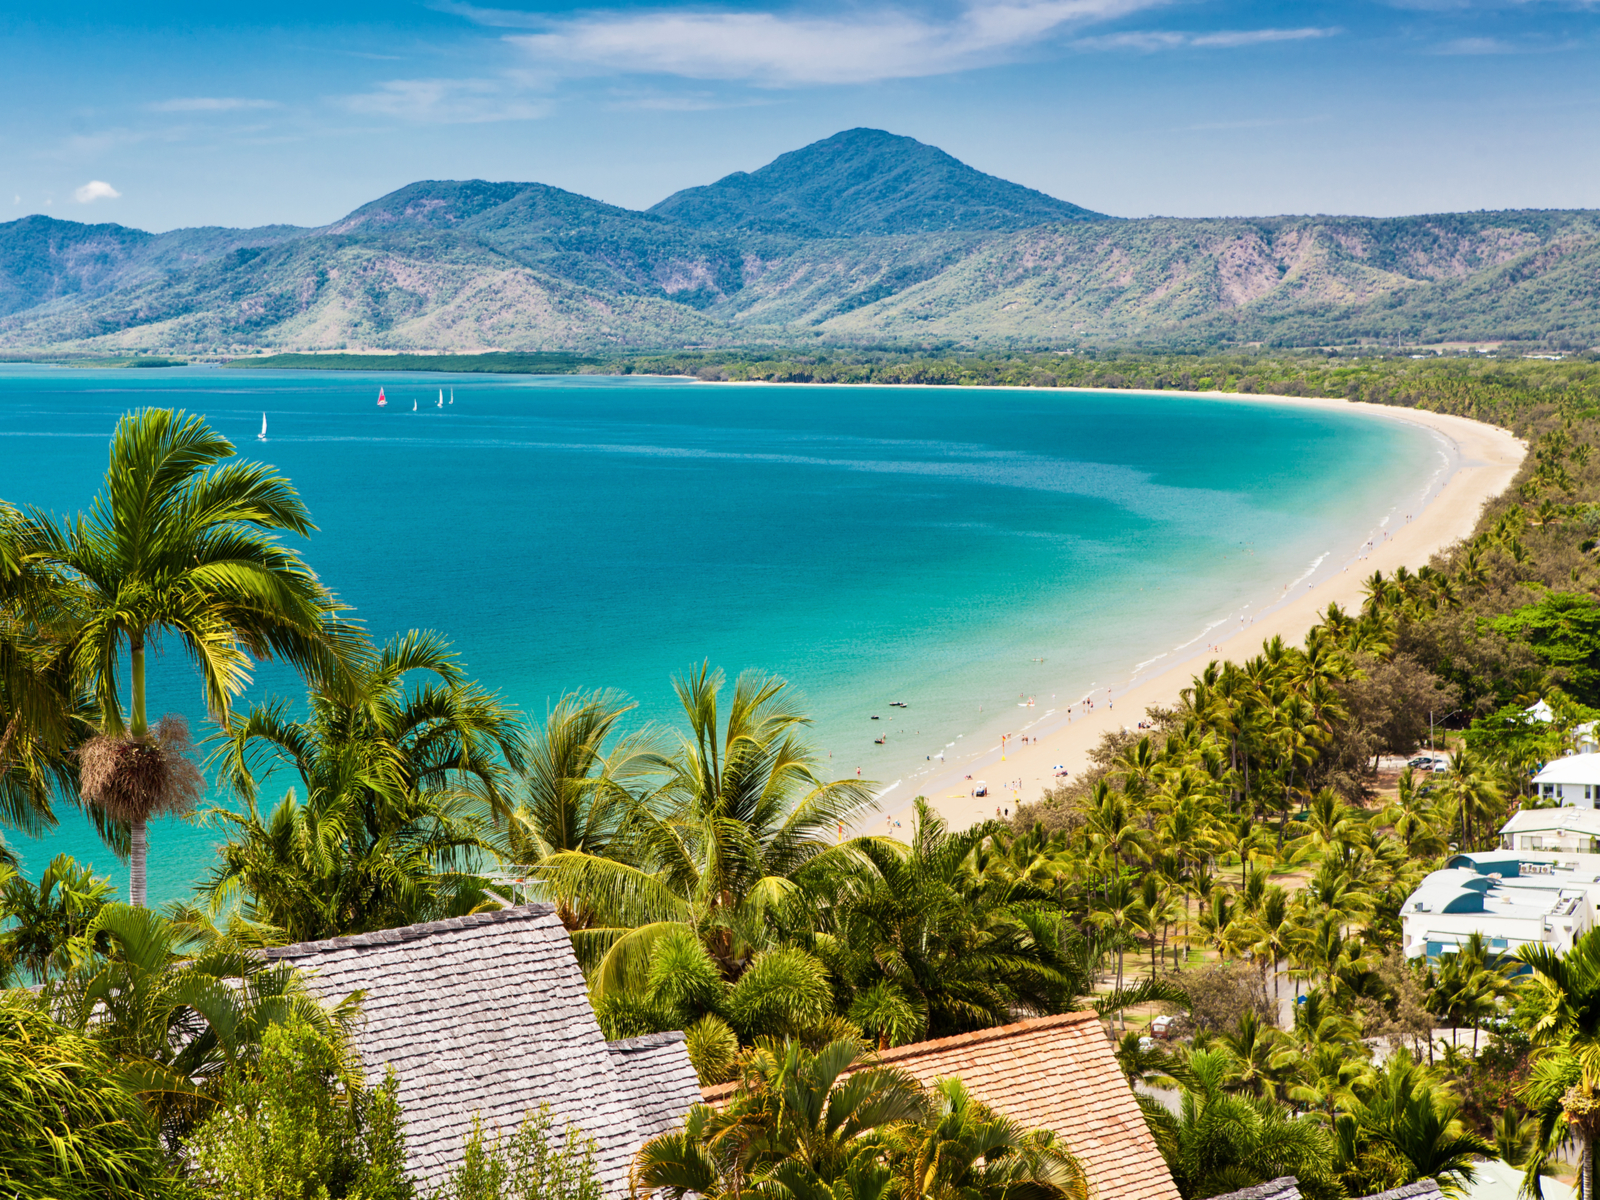 Port Douglas pictured during the best time to visit Australia, in the Summer